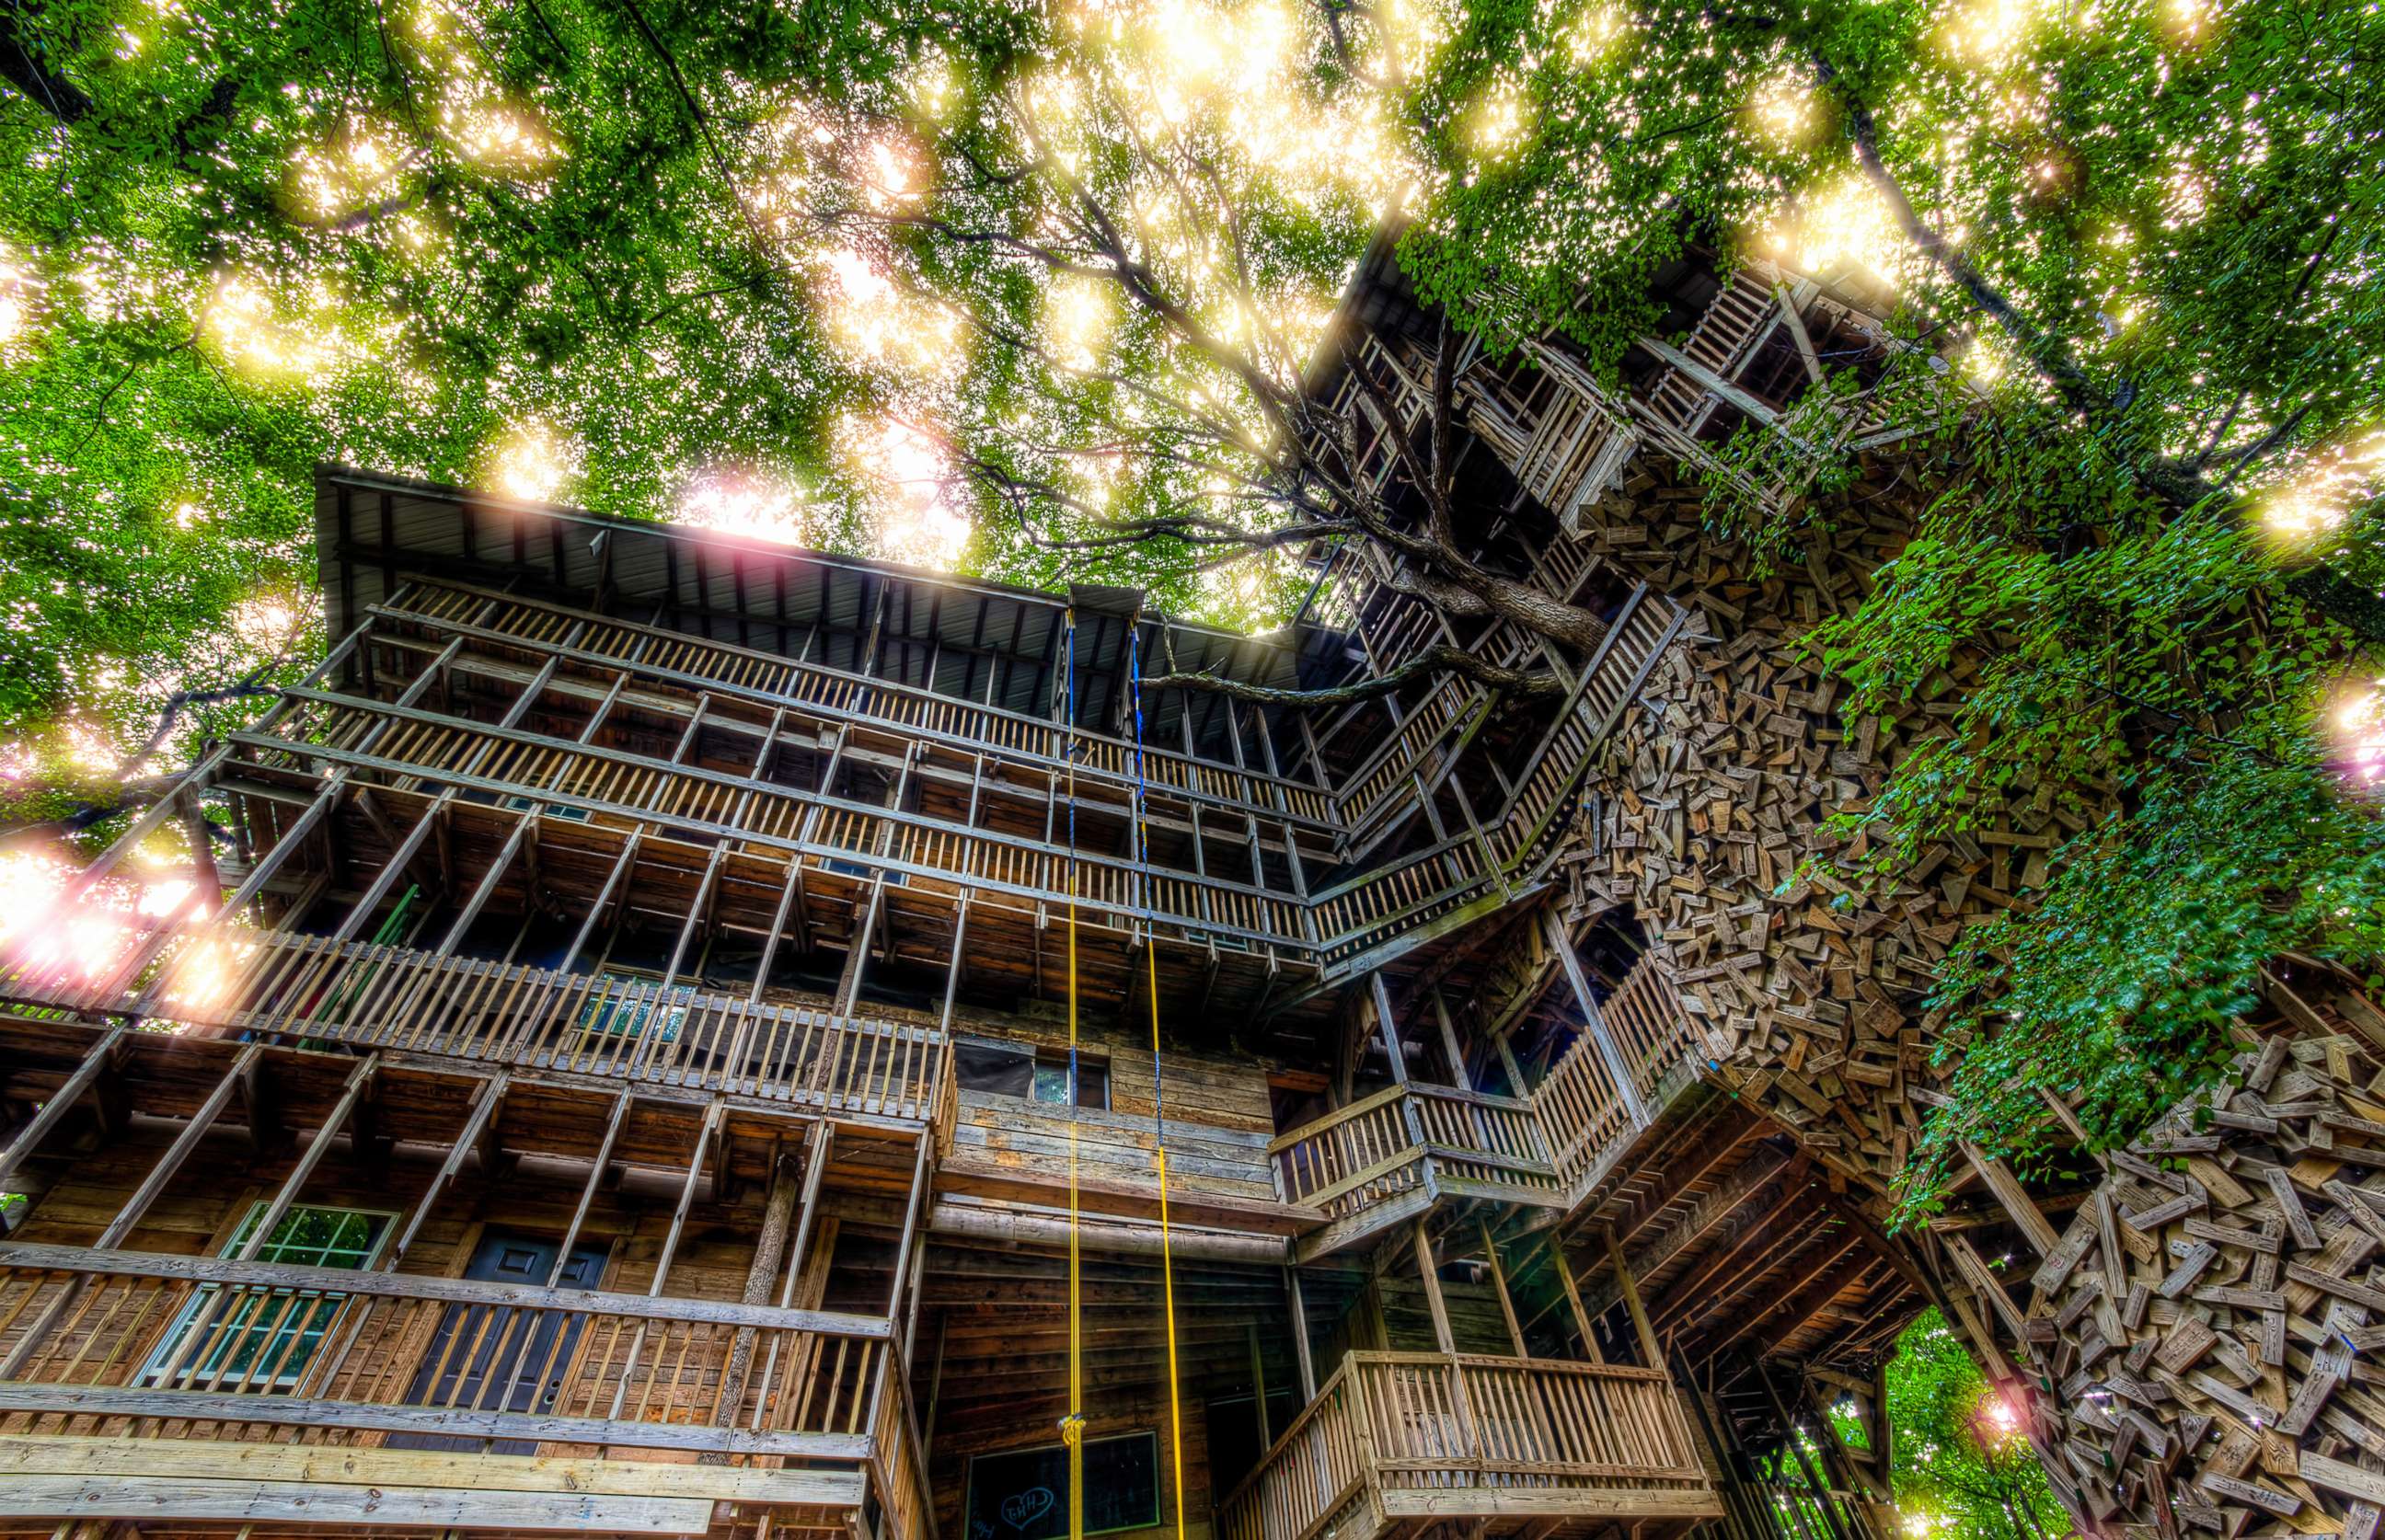 PHOTO: The Minister's Treehouse in Crossville, Tenn., July 14, 2012.